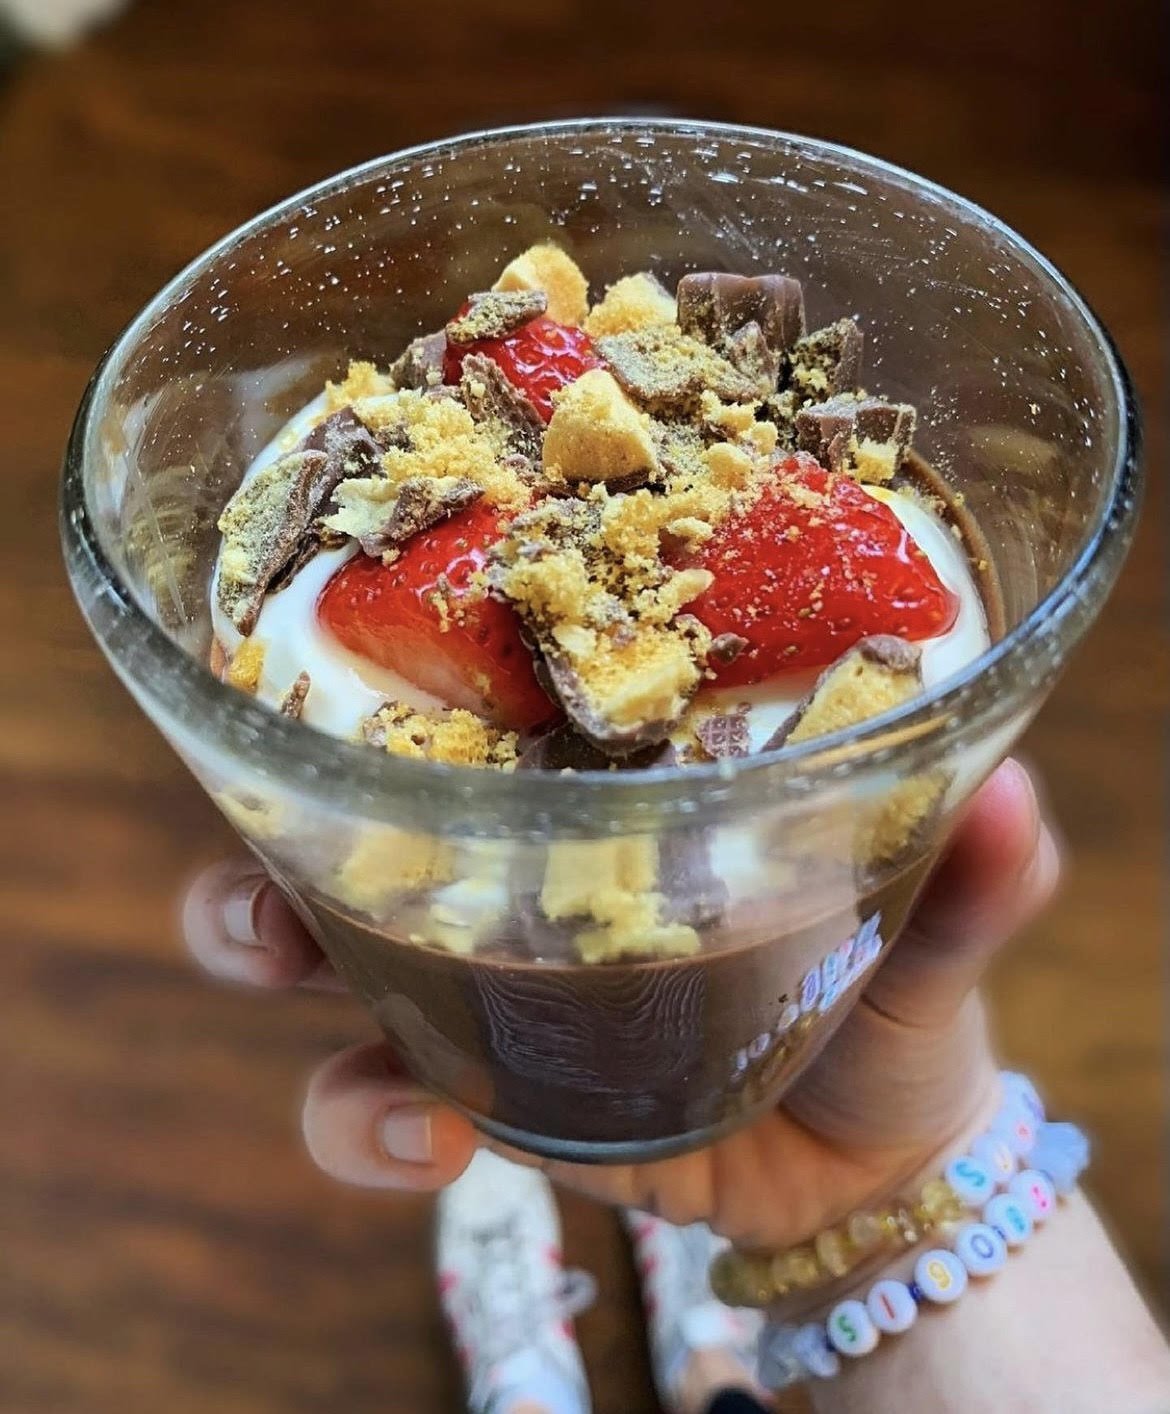 Georgia Hearn's Chocolate Mousse with Sour Cream, Crunchie Crumb and Strawberries